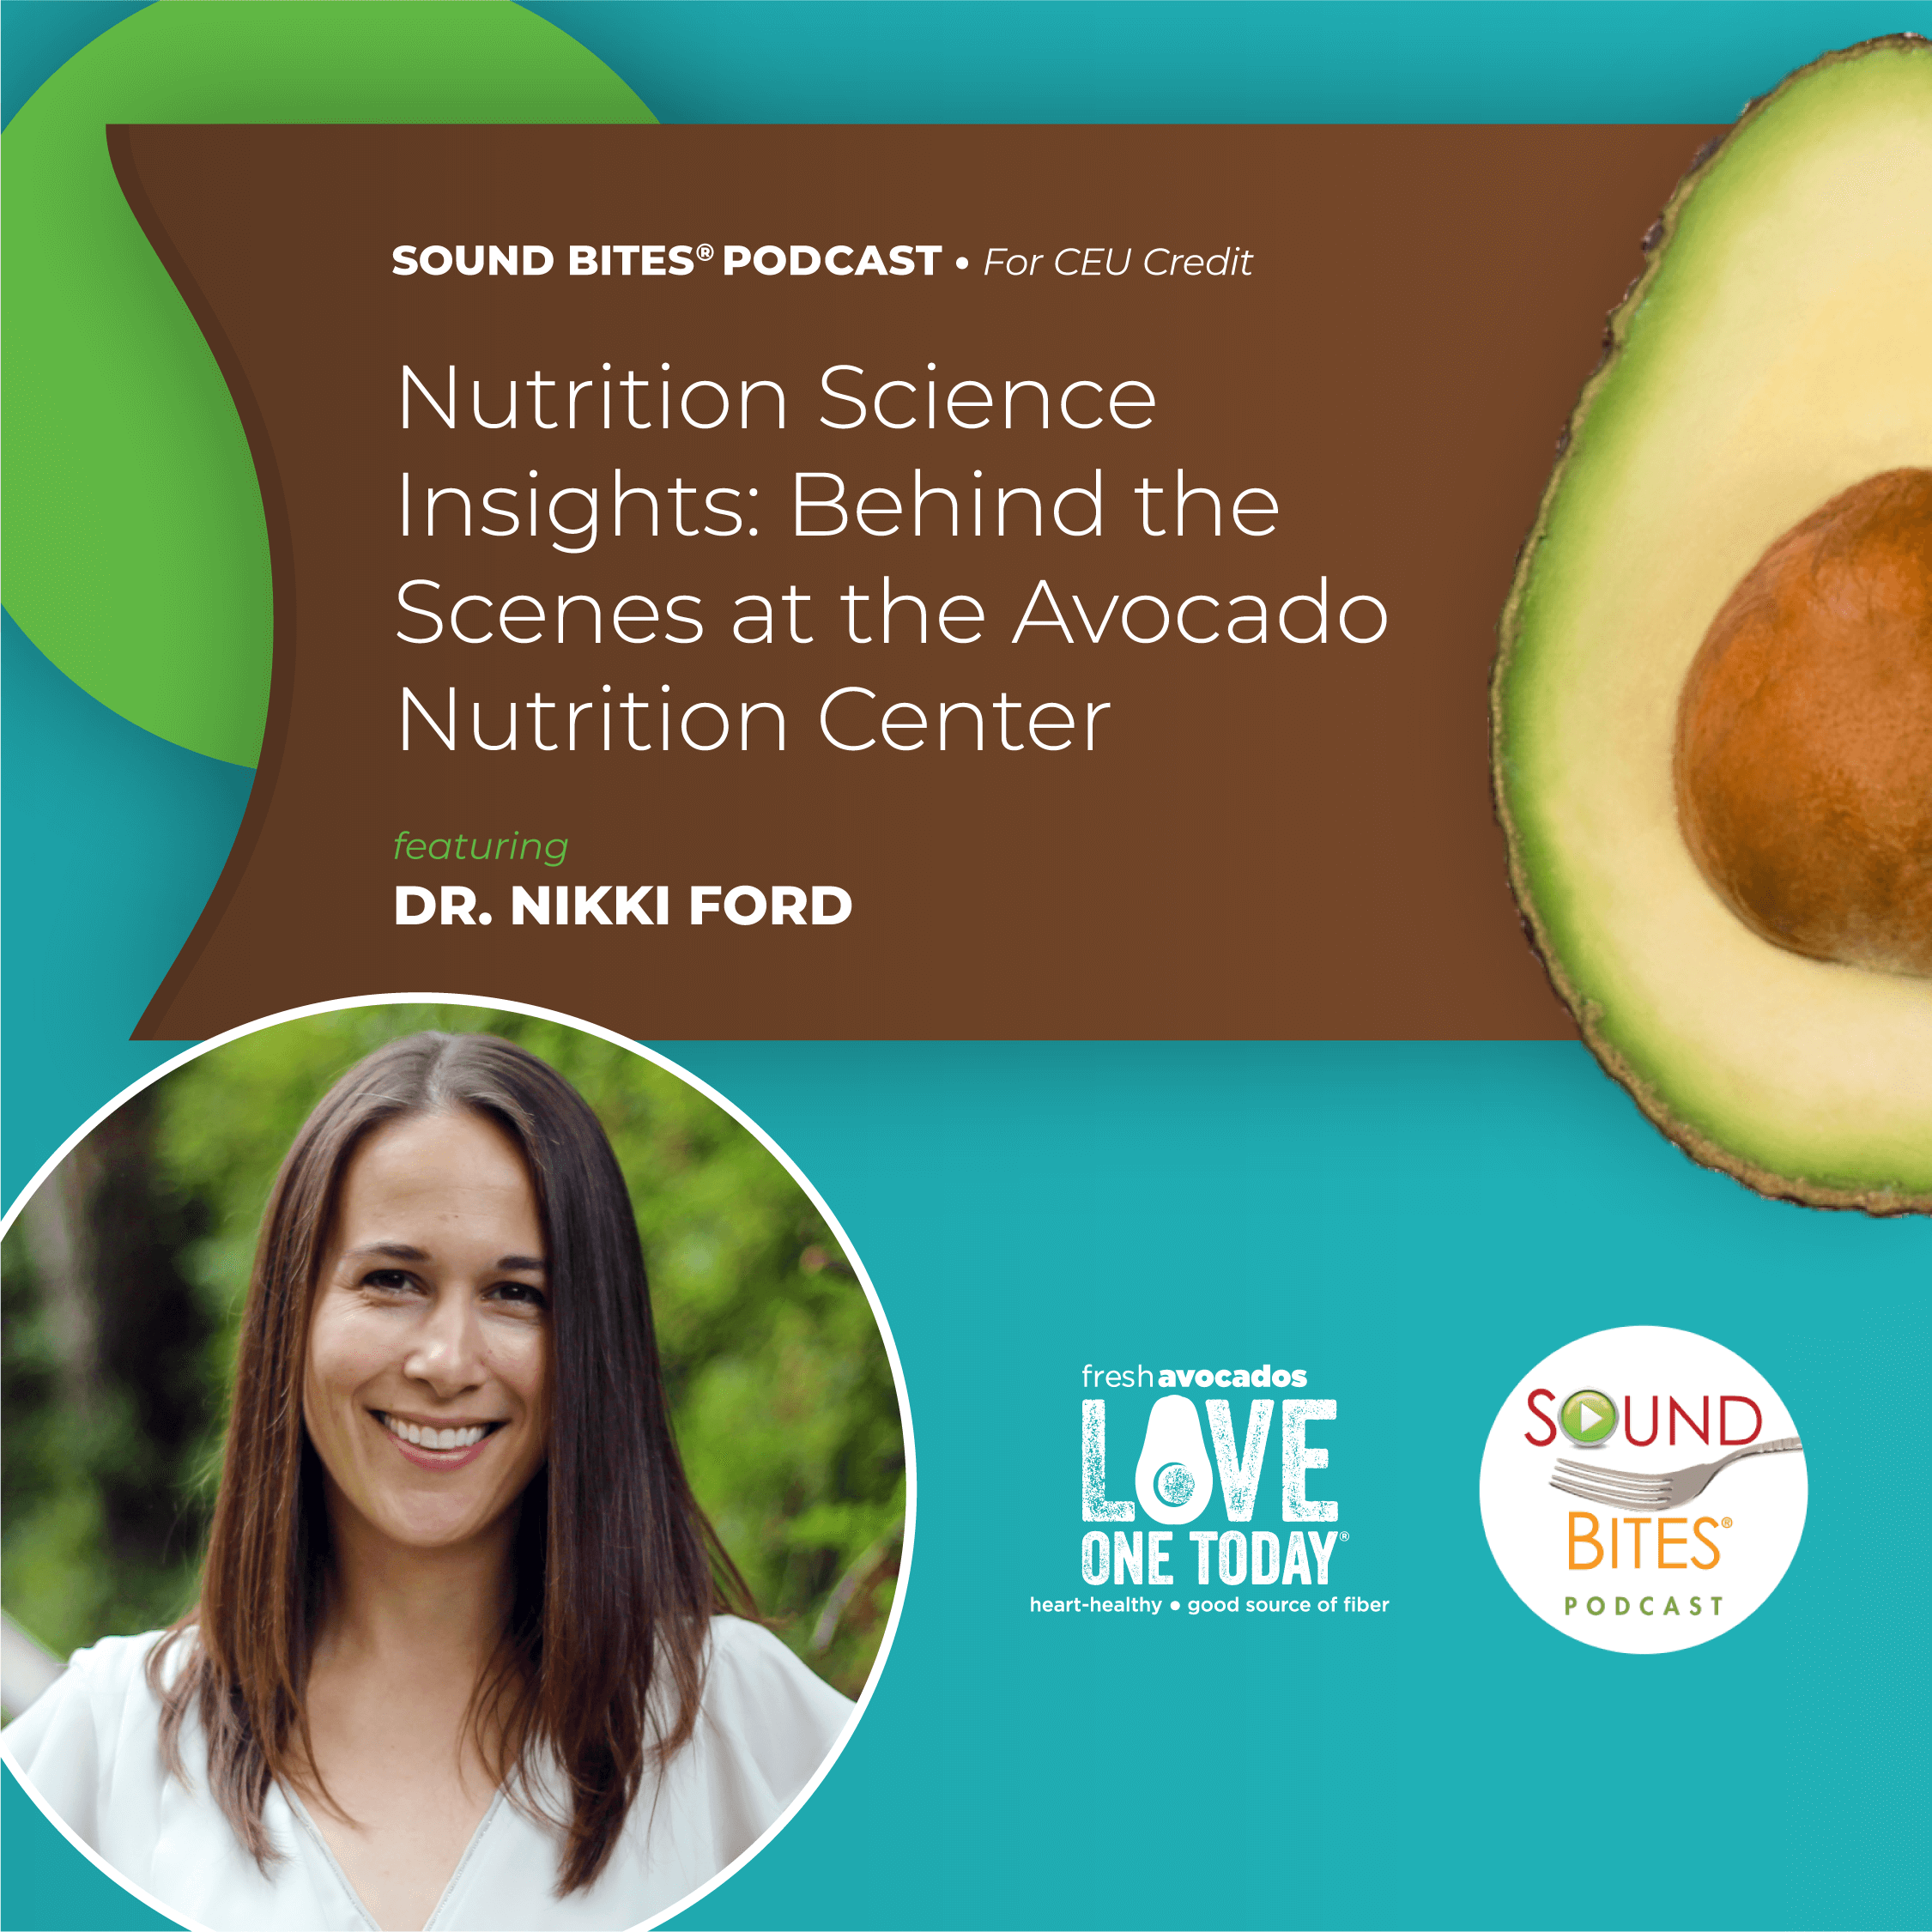 Podcast Episode 199: Nutrition Science Insights: Behind the Scenes at the Avocado Nutrition Center - Dr. Nikki Ford